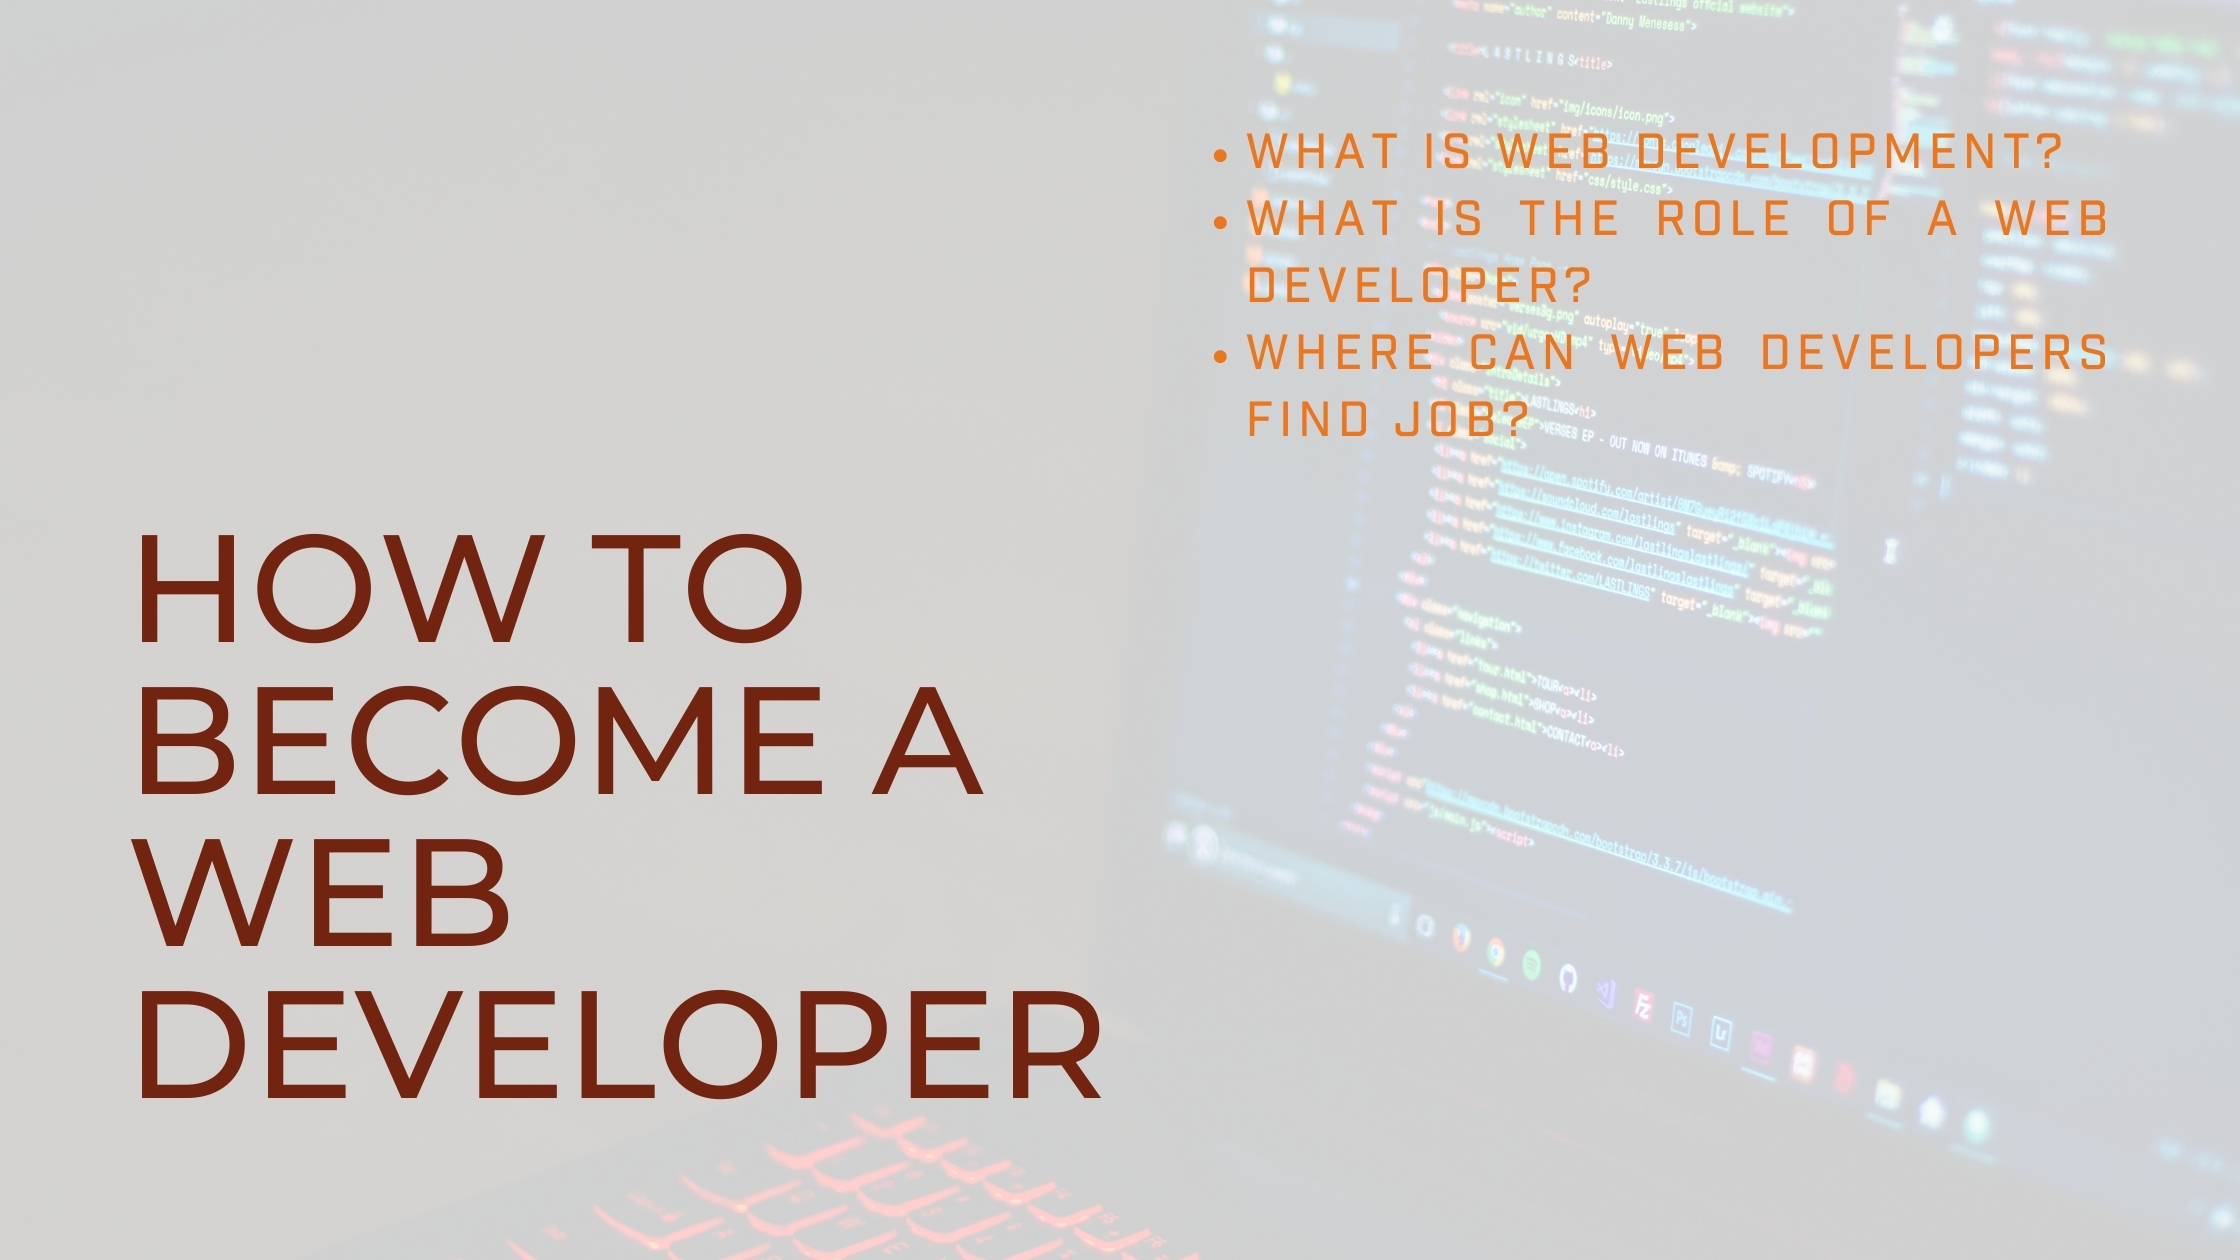 How-to-Become-a-Web-Developer